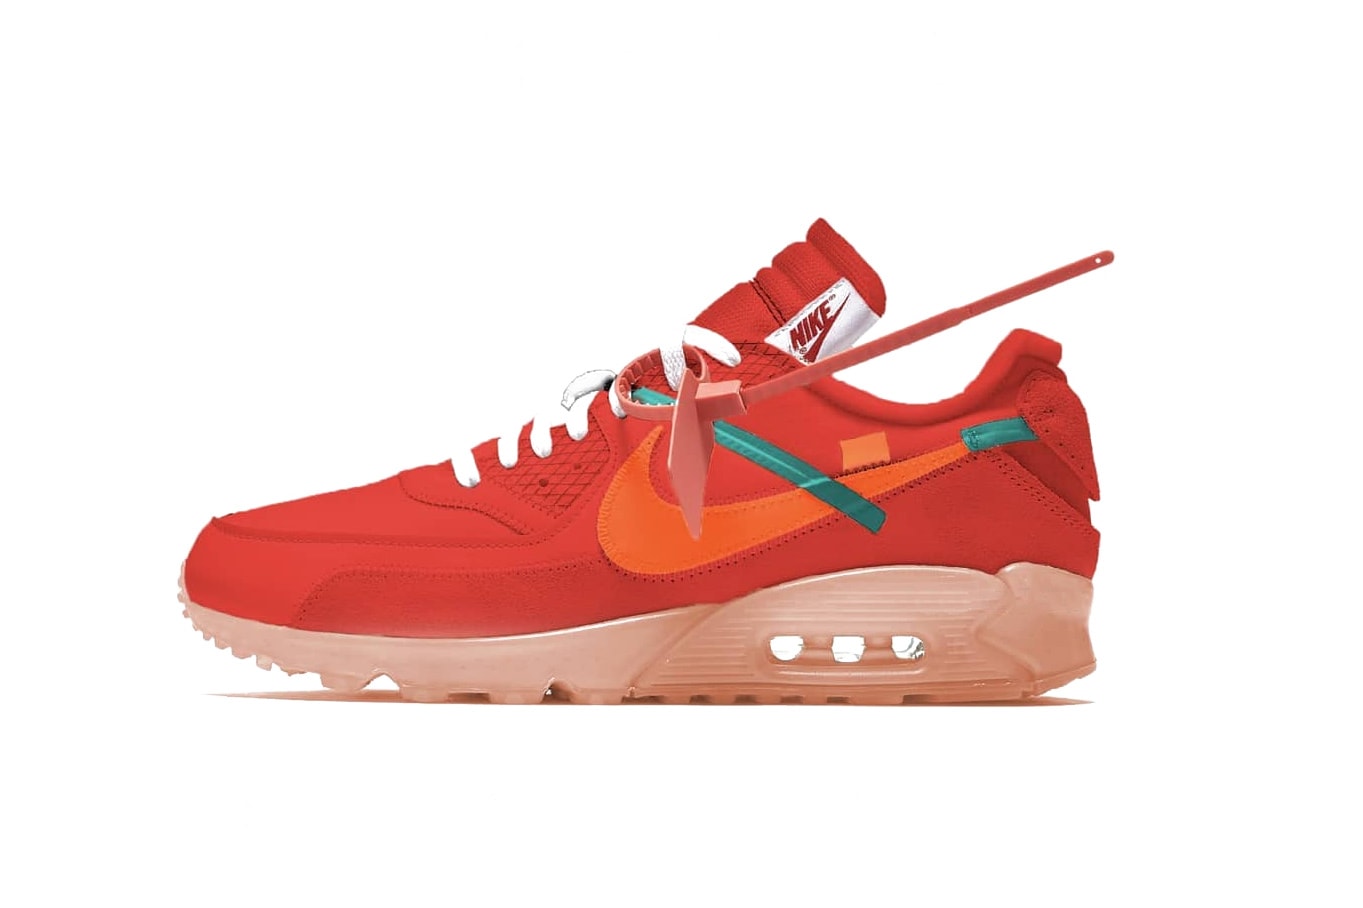 Virgil Abloh x Nike Air Max 90 "University Red" Collaboration The Ten Upcoming Release